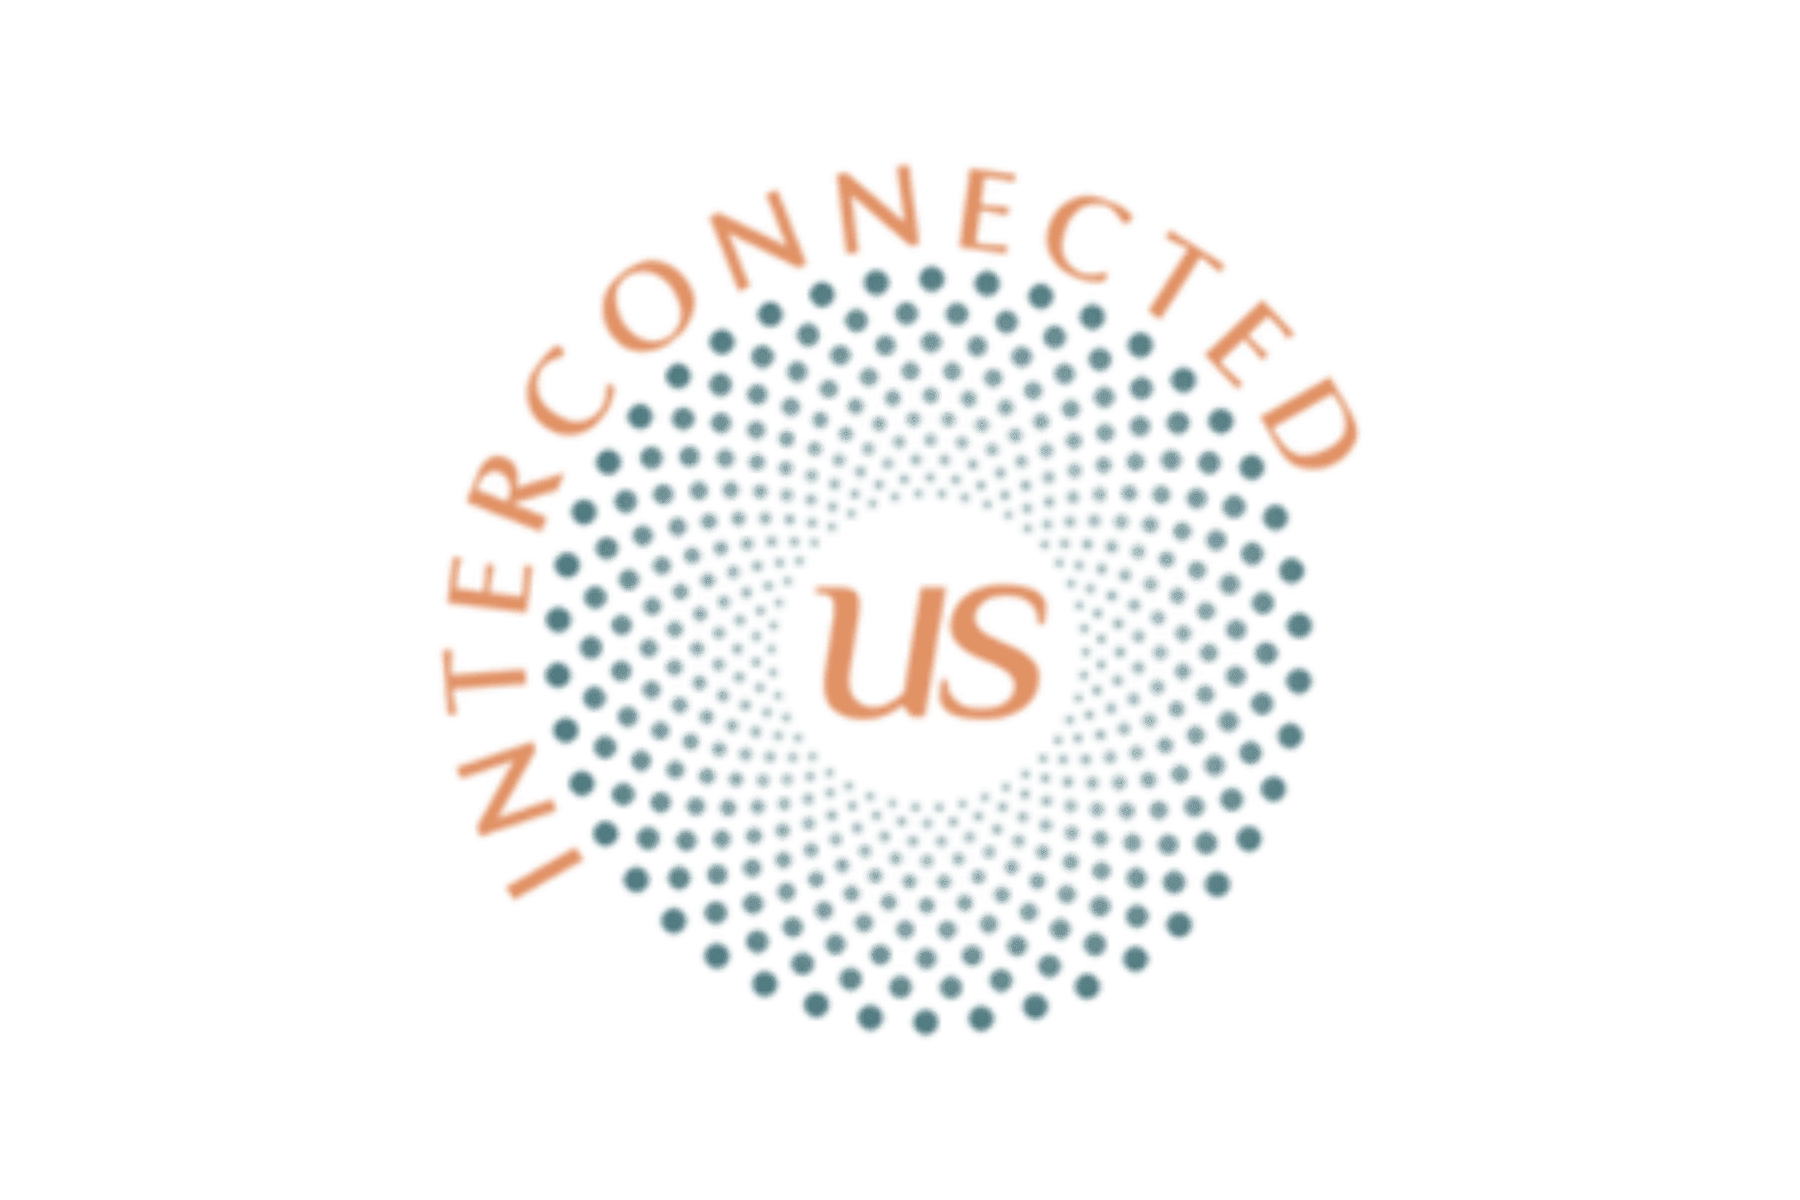 Interconnected US